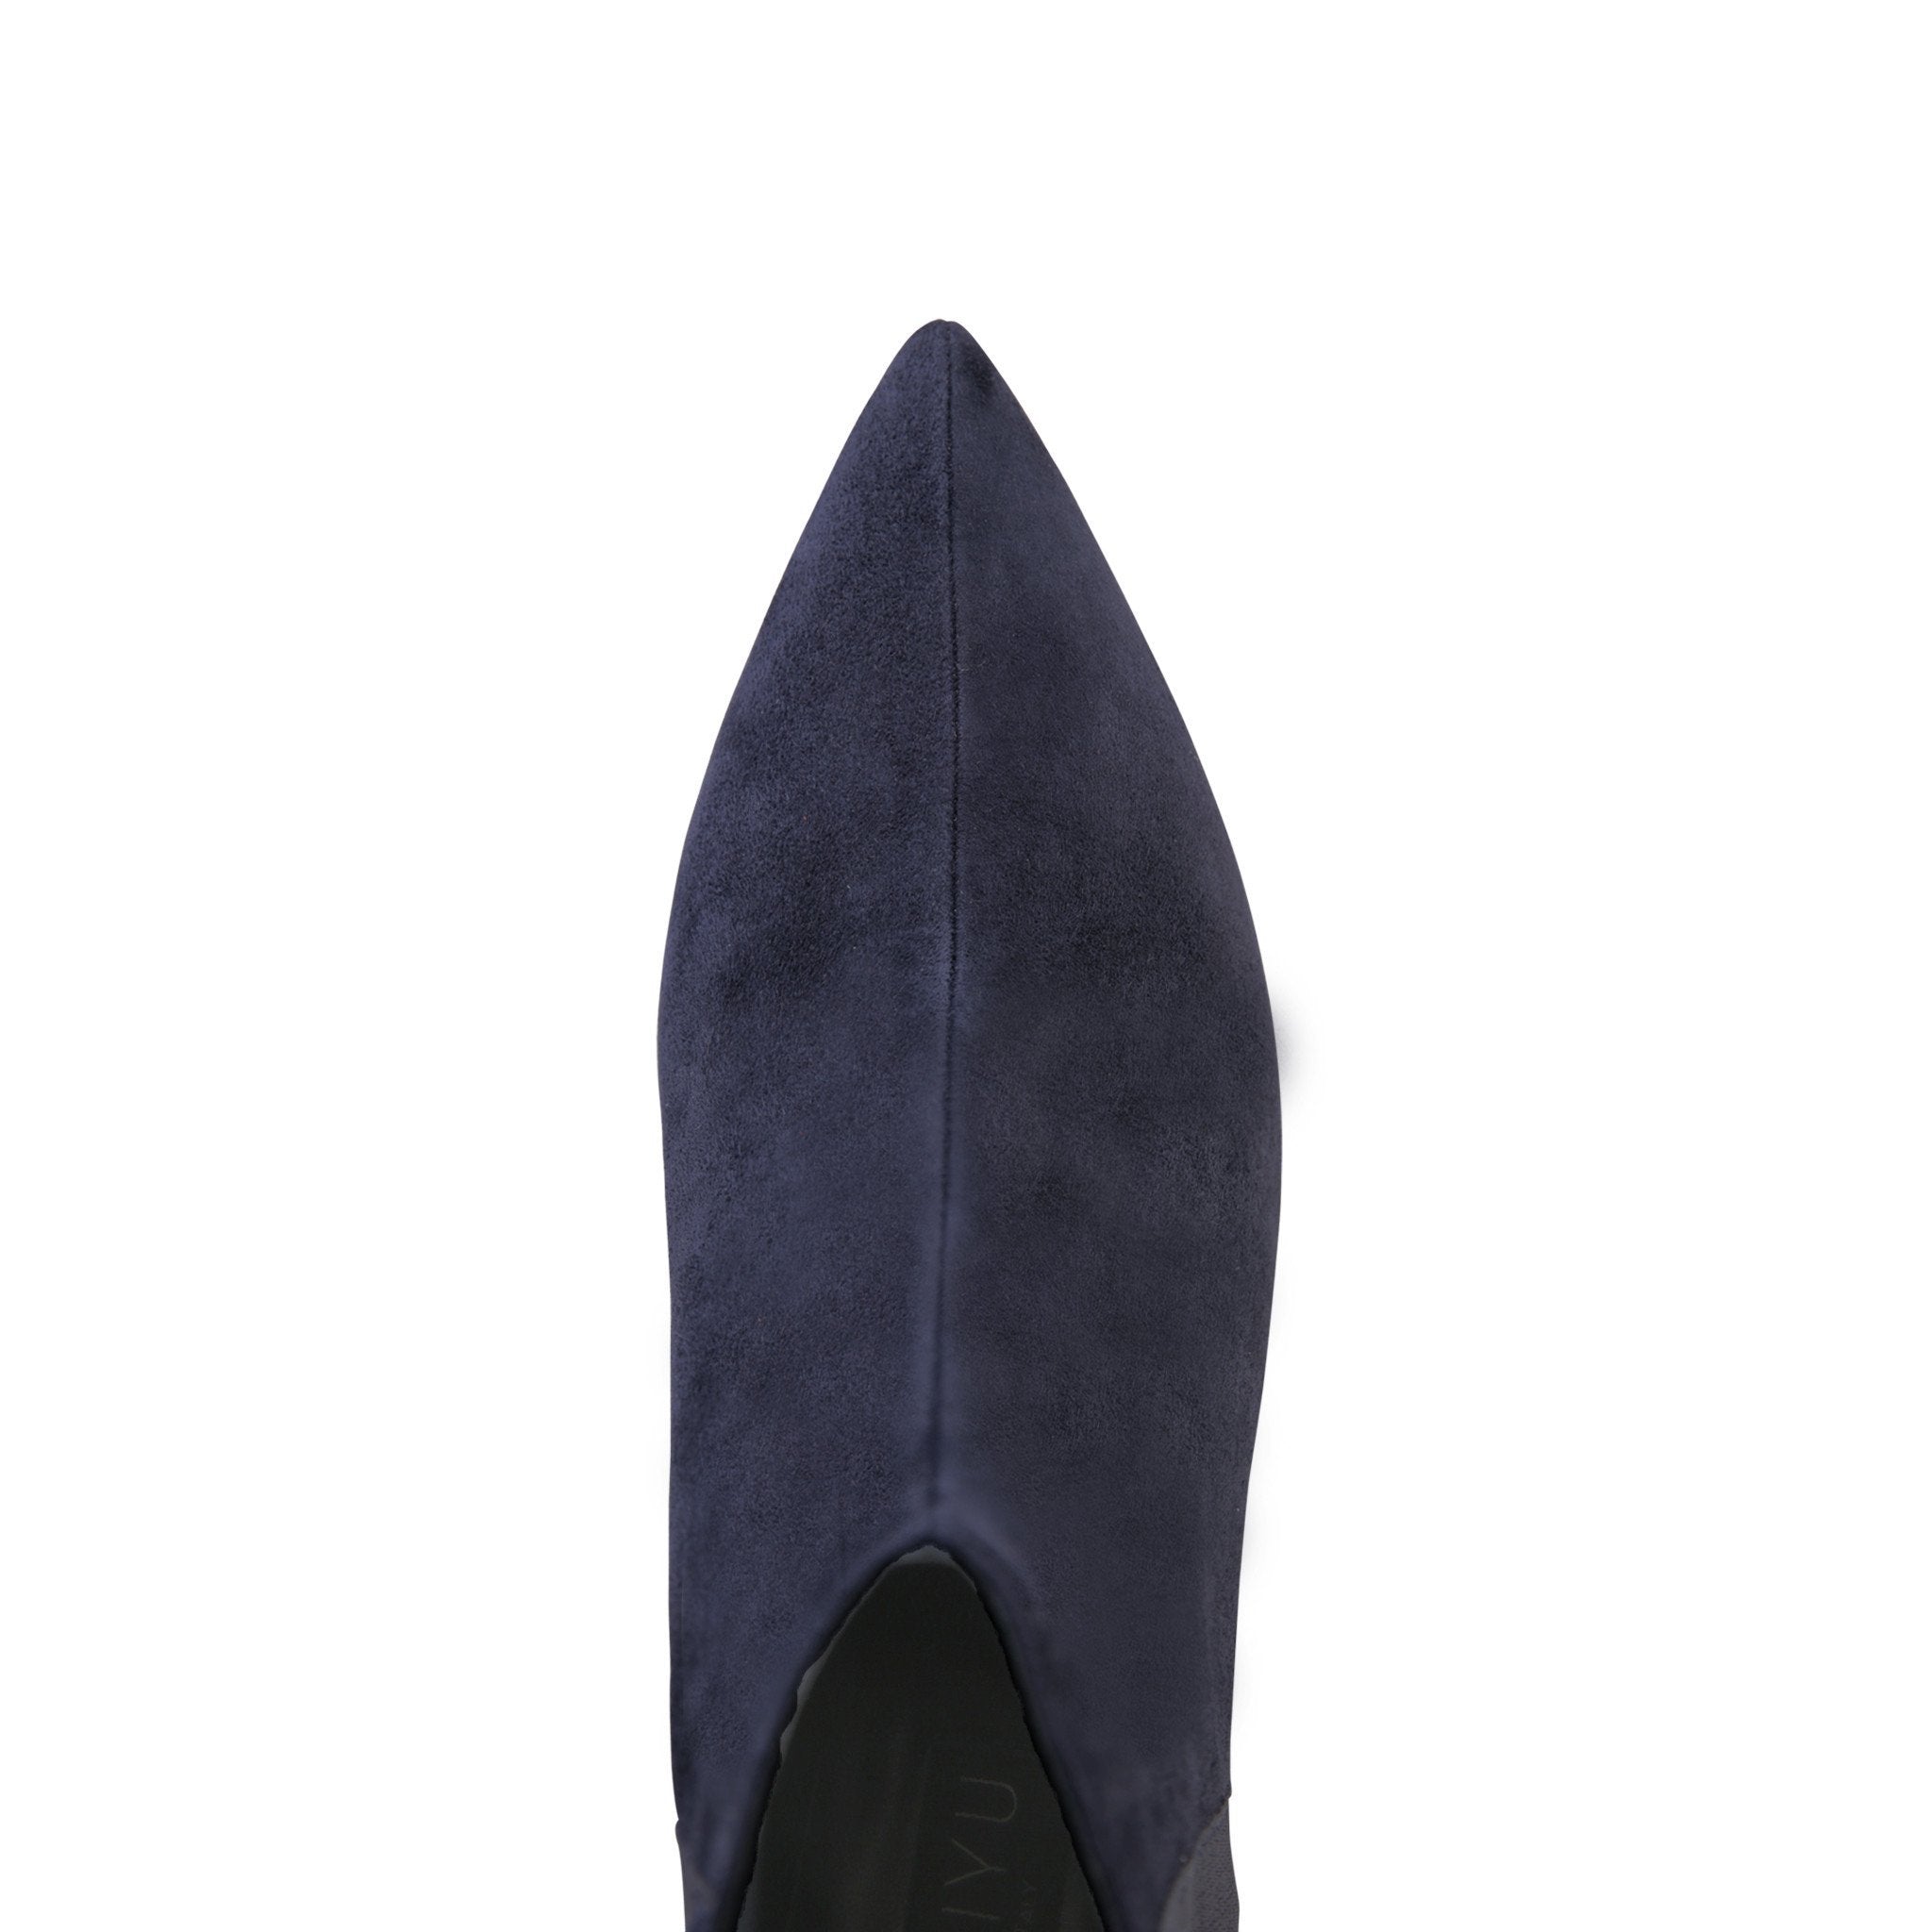 FORTE (faux suede), VIAJIYU - Women's Hand Made Sustainable Luxury Shoes. Made in Italy. Made to Order.